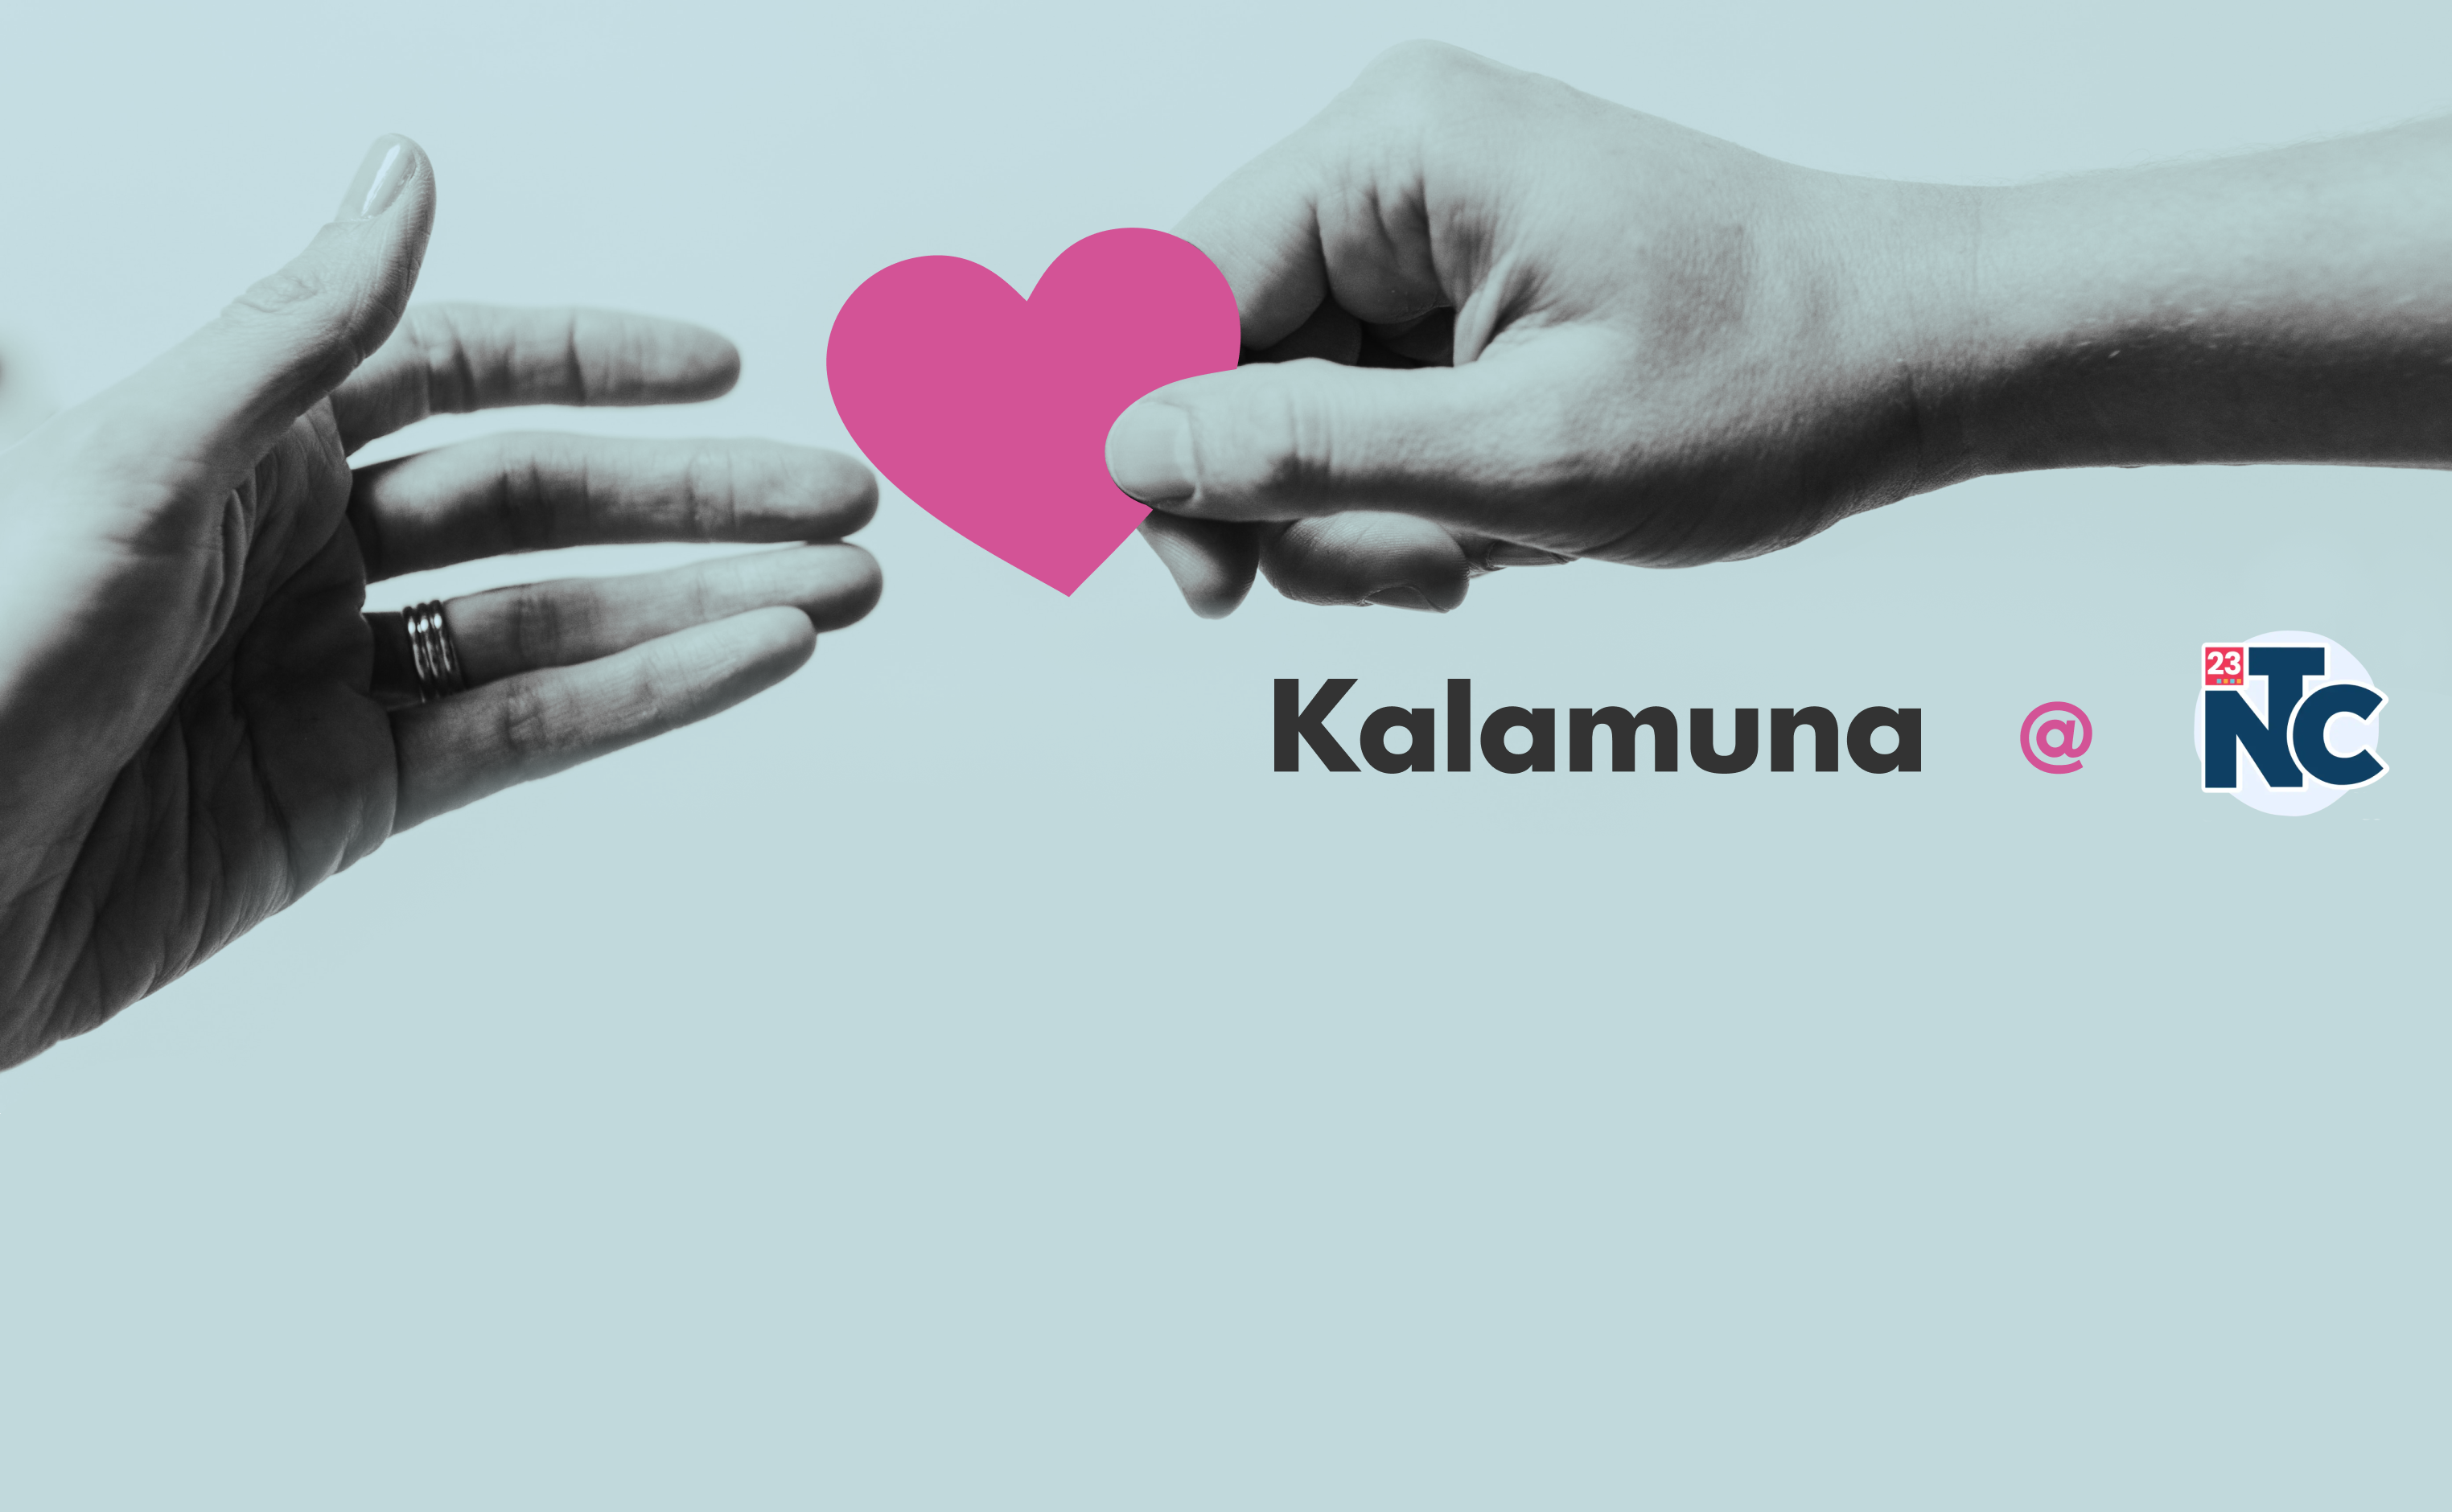 Two hands reaching out to each other, one holding a pink heart. The Kalamuna logo and 23NTC logo are in the bottom right corner. Blue background. 